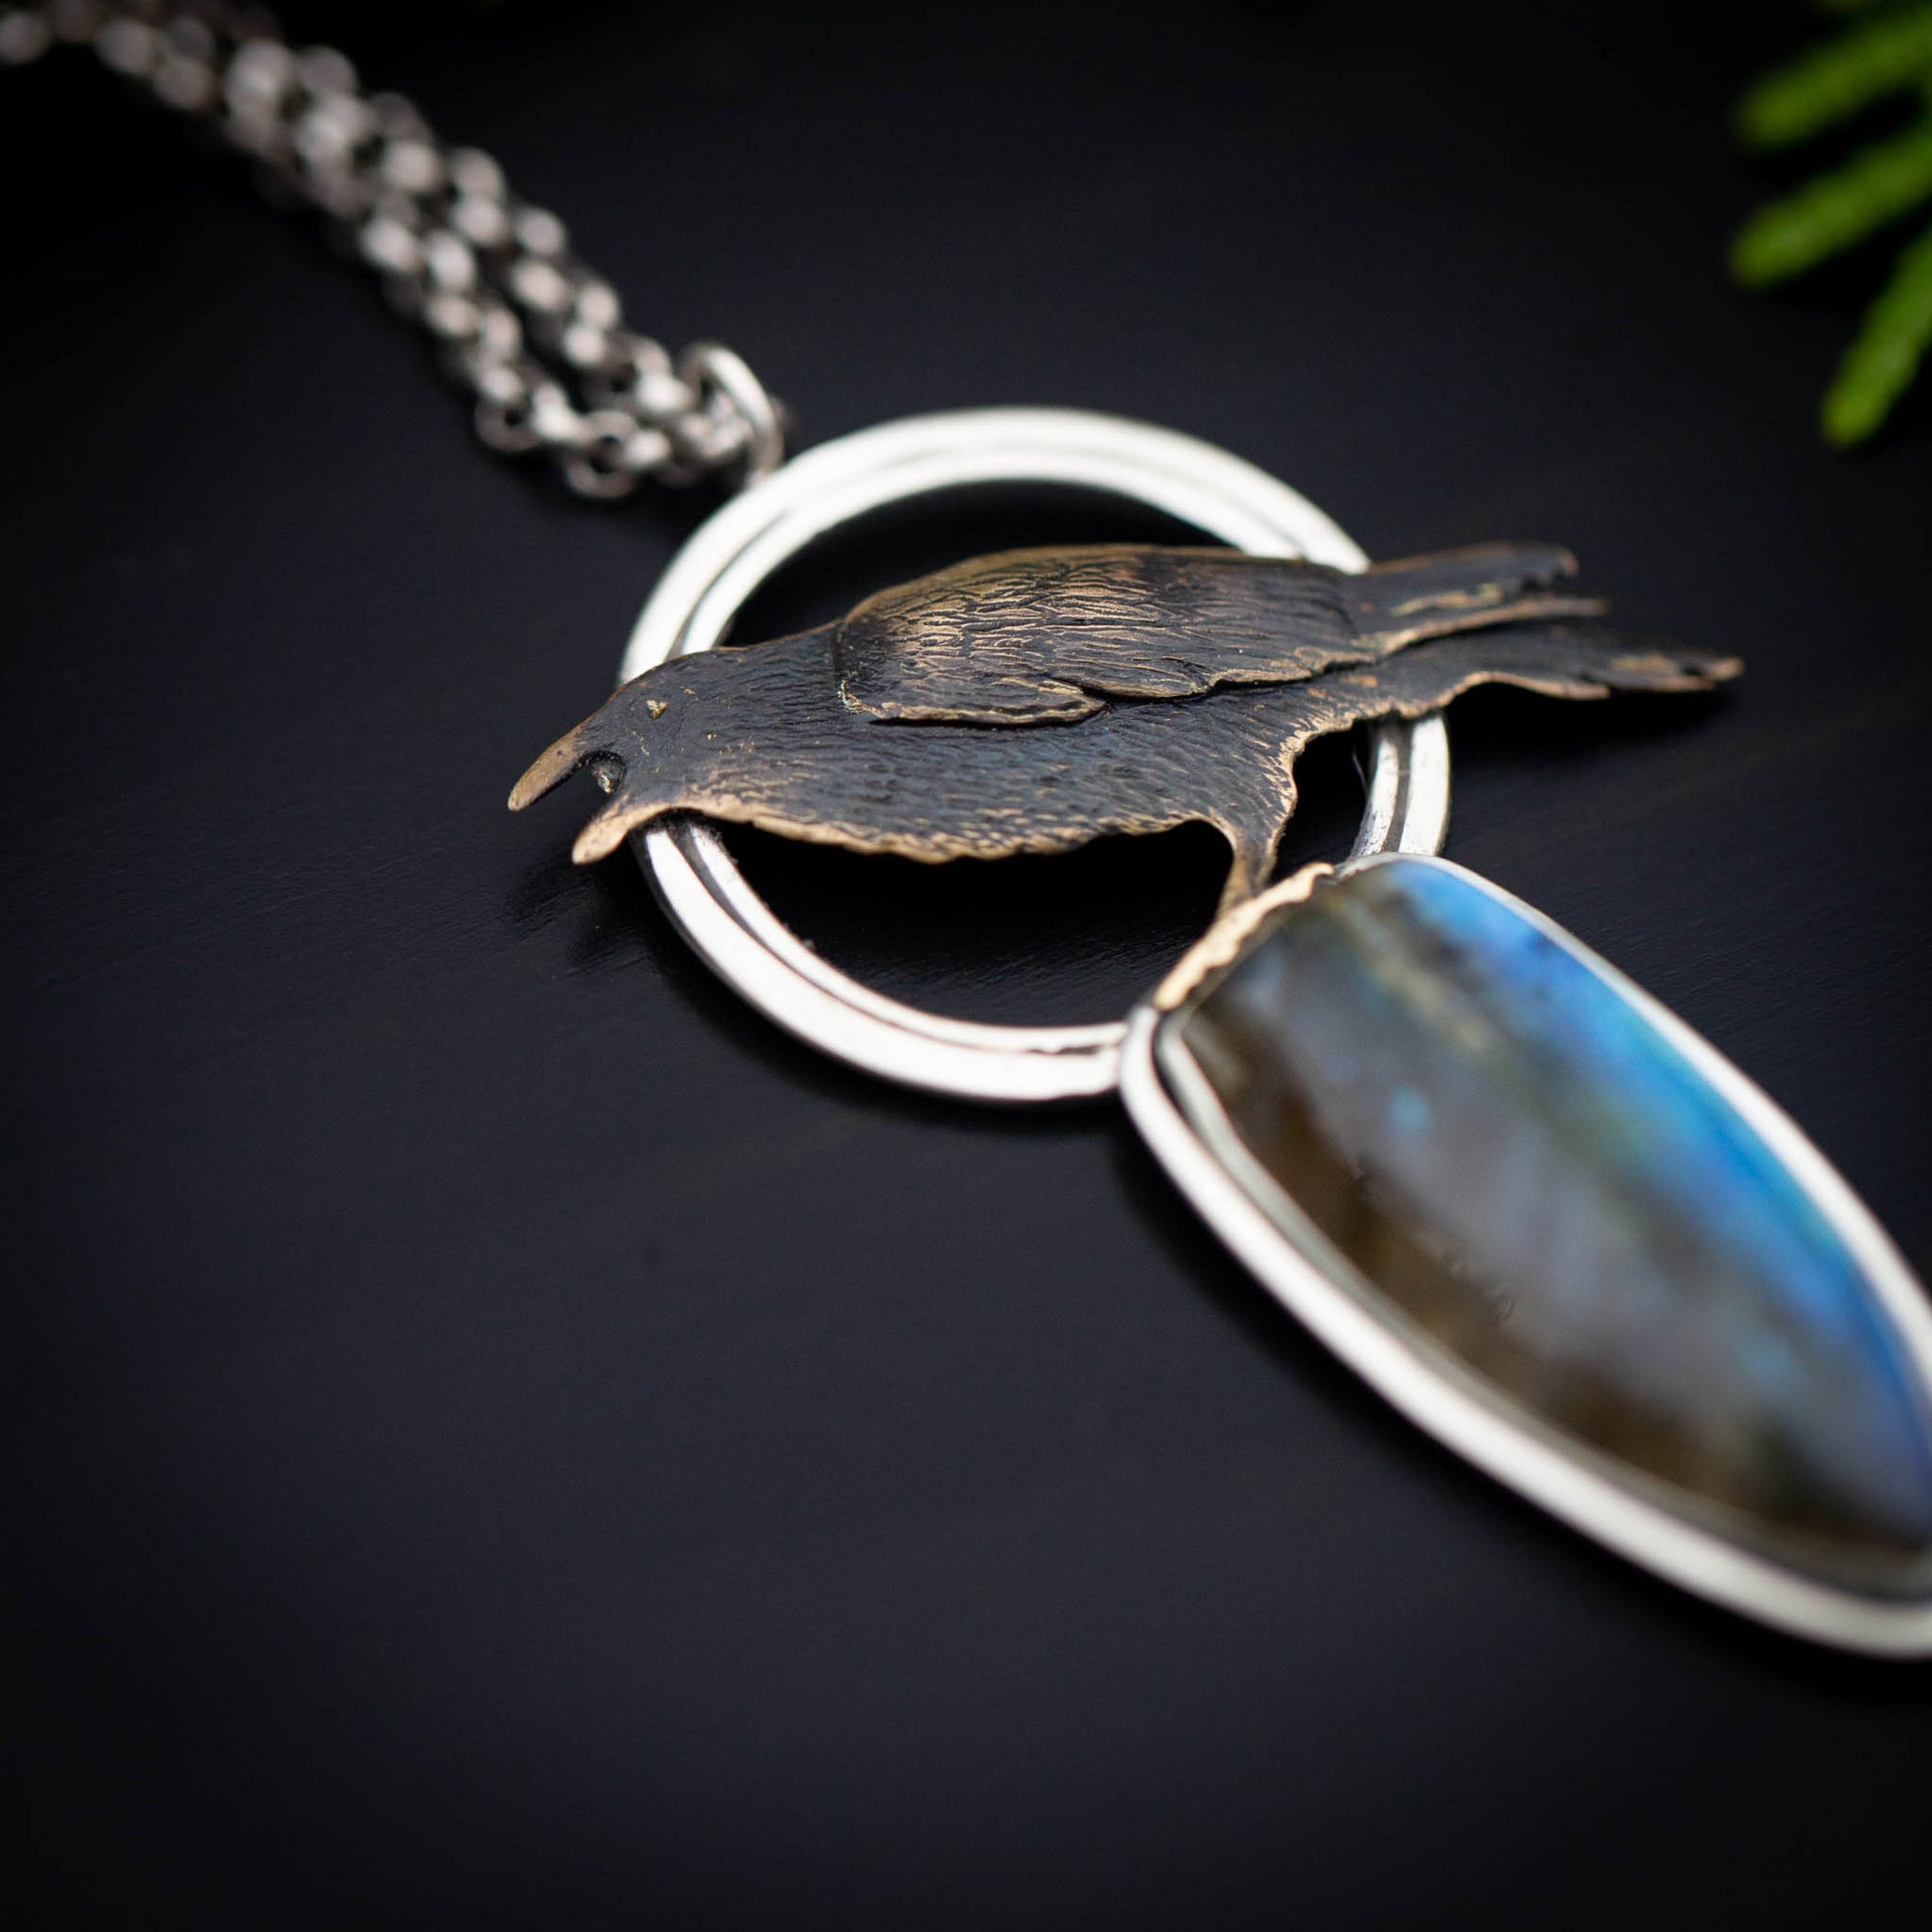 a detail of a necklace featuring a brass raven on an open silver circle utop a tear drop labradorite stone shown on a black background